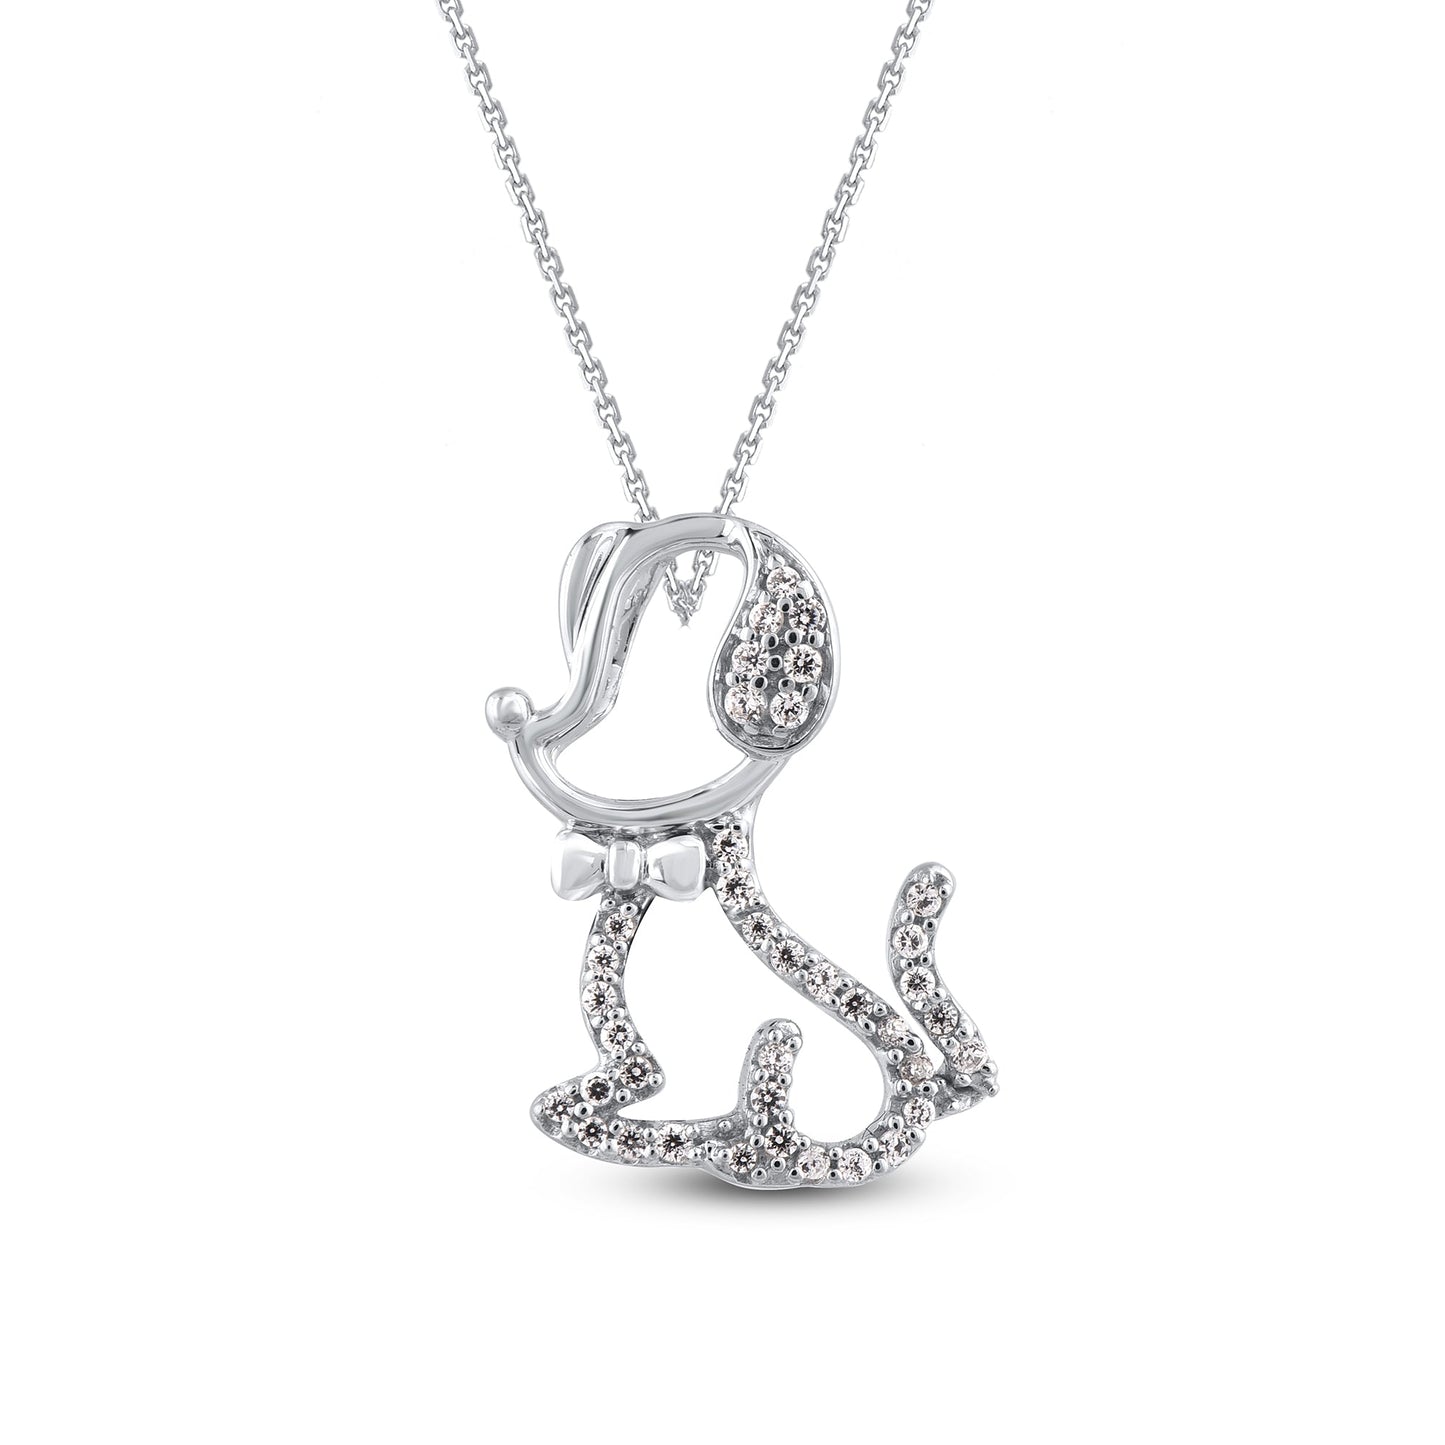 Puppy Dog Pendant Necklace in 925 Sterling Silver